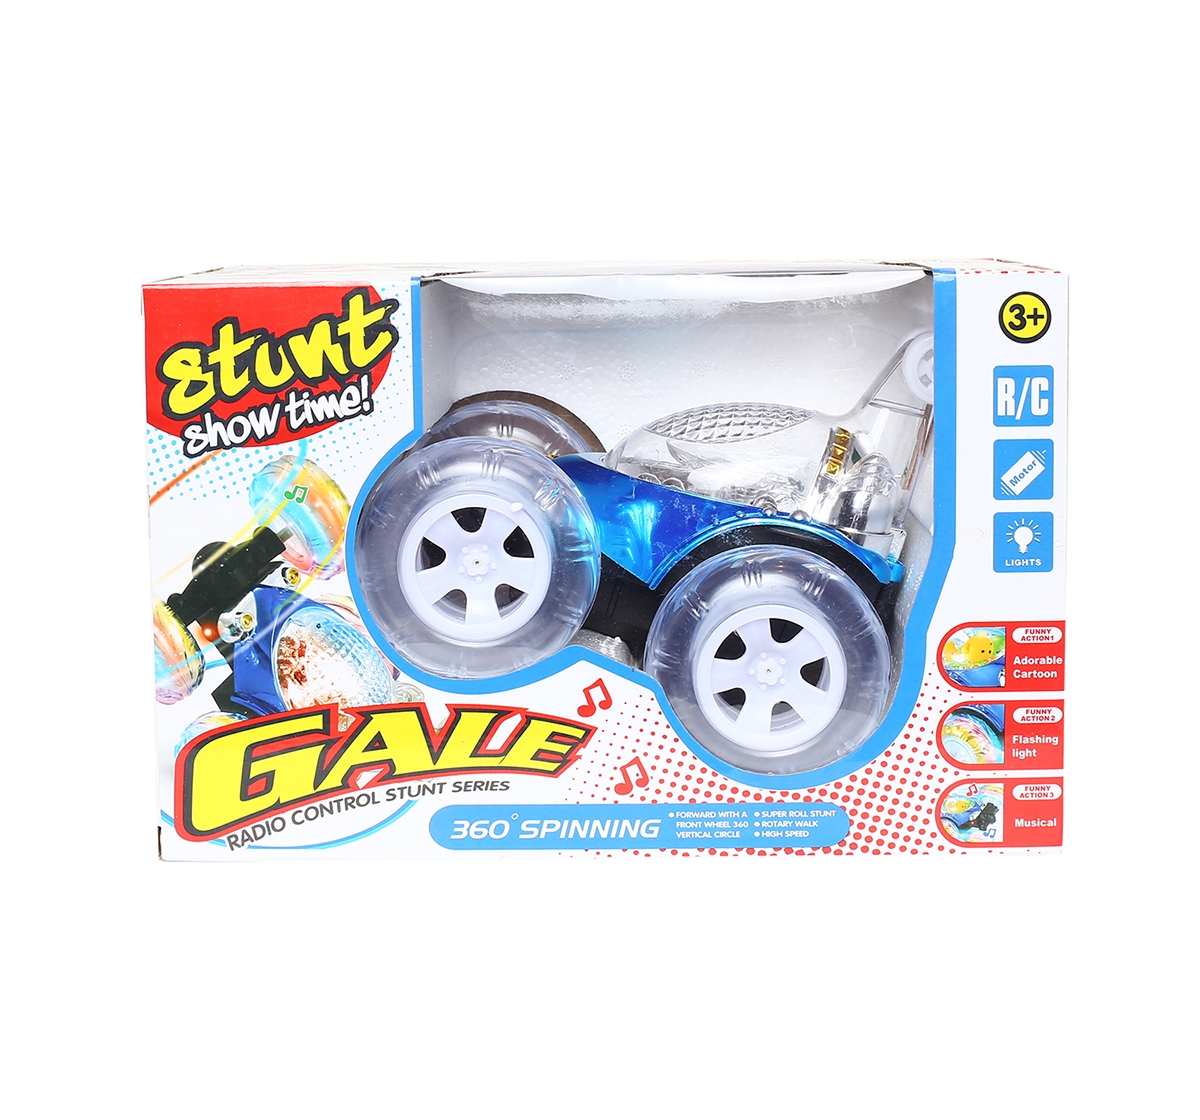 Gale | Gale Comdaq Gale Stunt Car With Remote Control 360 Spinning Remote Control Toys for Kids age 3Y+ 